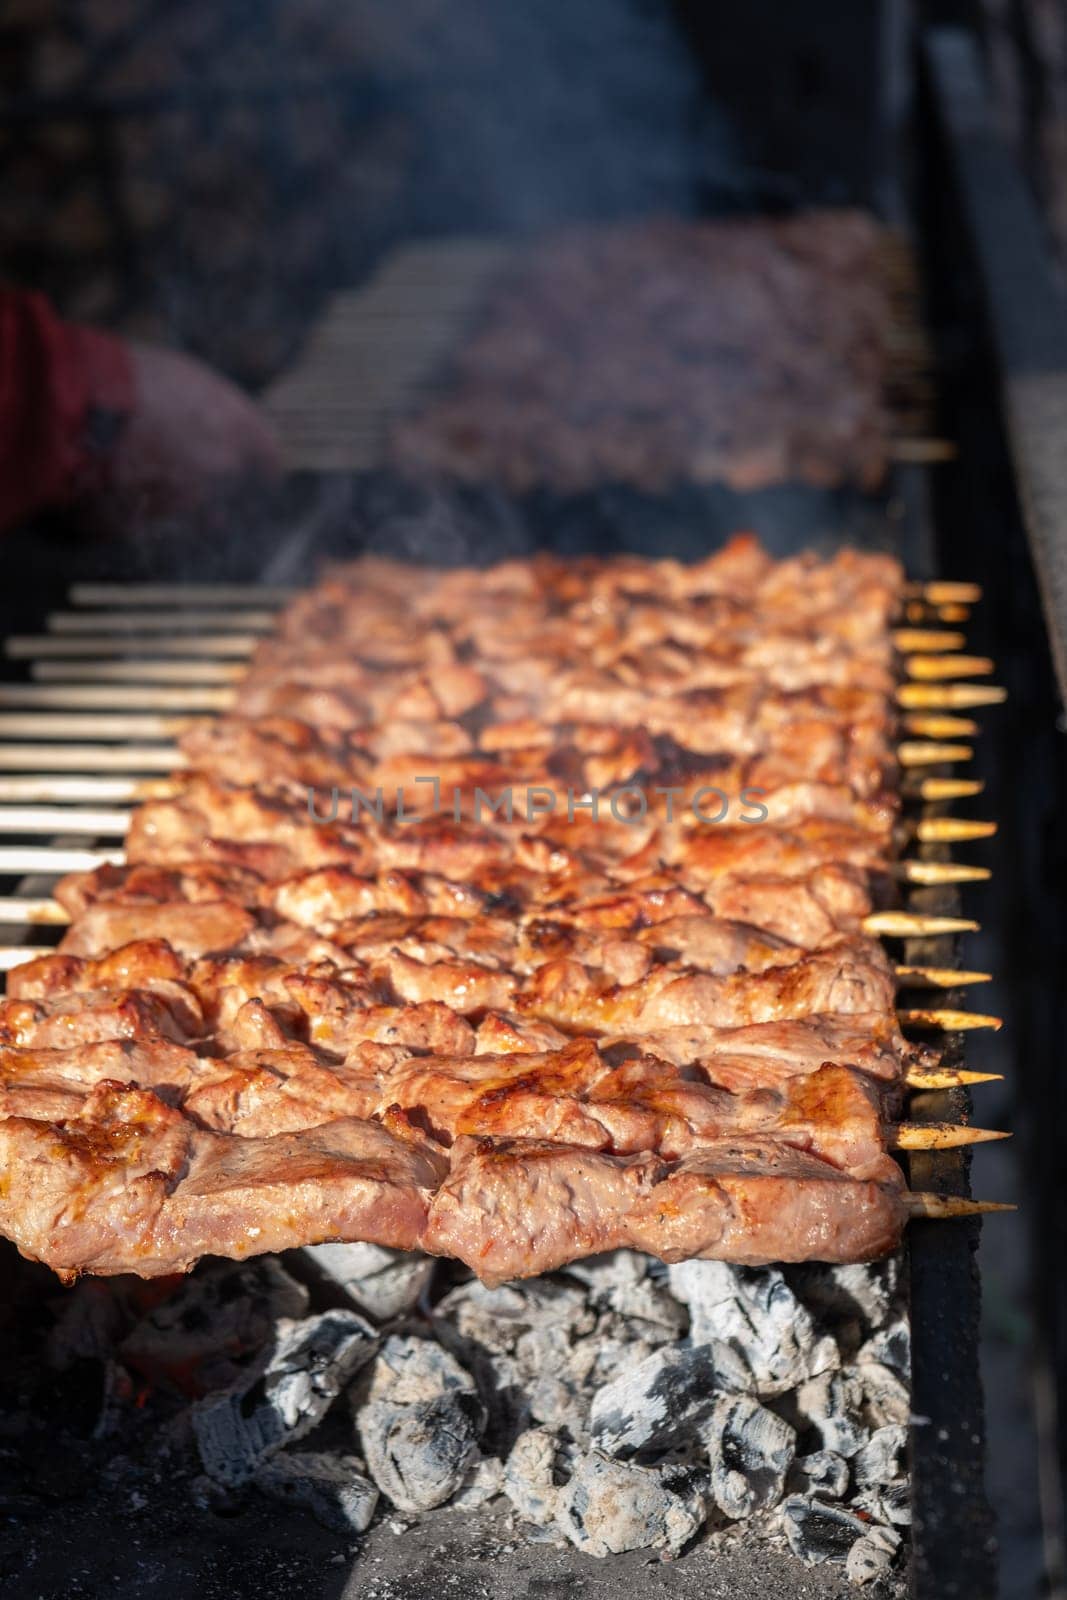 Meat pieces strung on metal skewers on the grill at sunset by AnatoliiFoto